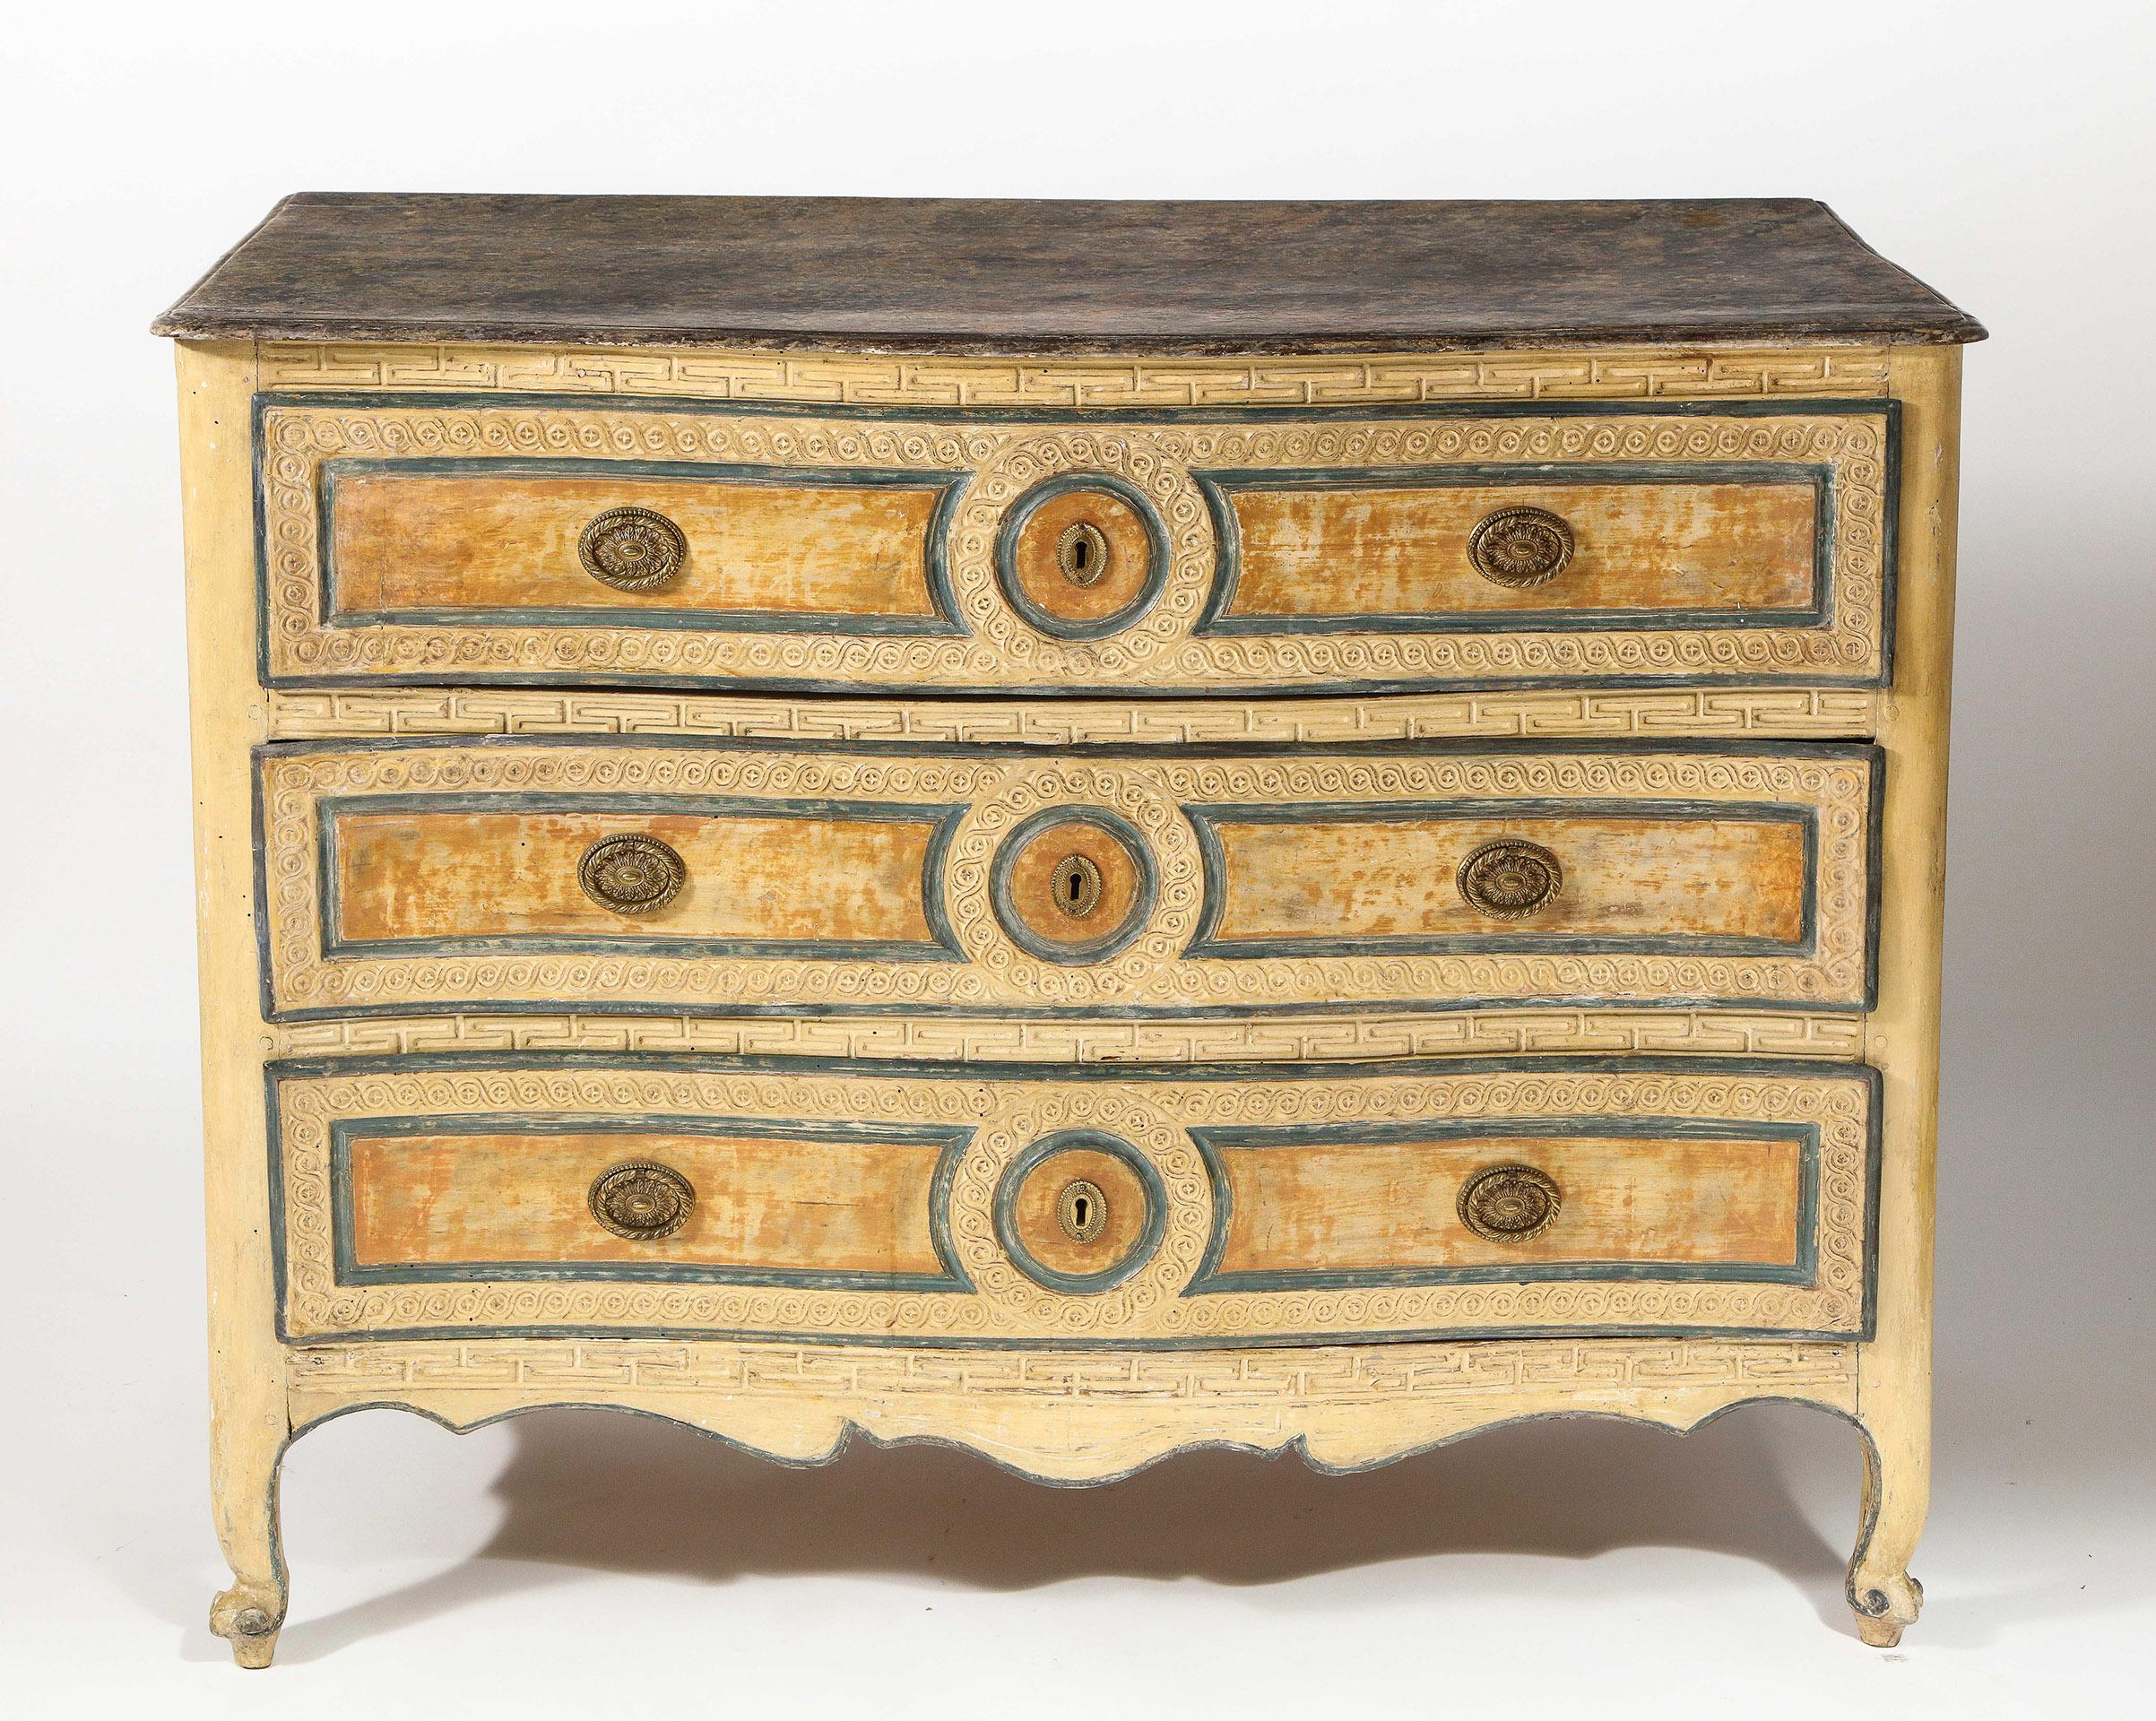 The all-over painted commode with a faux marble top, the front having an incised Greek key design separating 3 drawers, each with incised interlocking scroll work. 

Some paint refreshed.